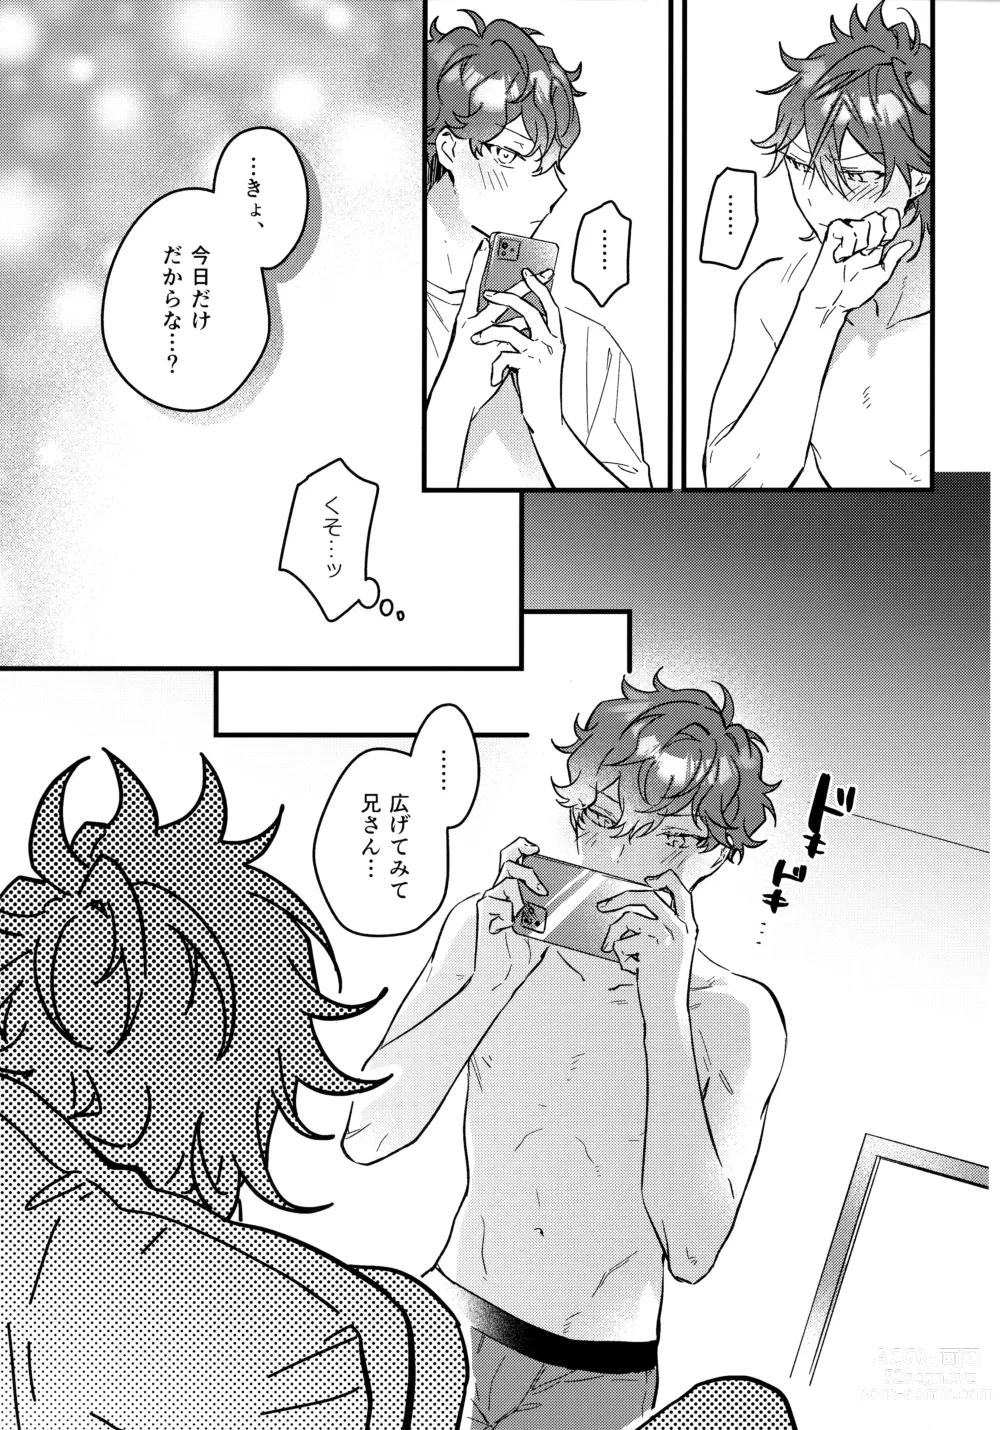 Page 10 of doujinshi H.M.D.R.